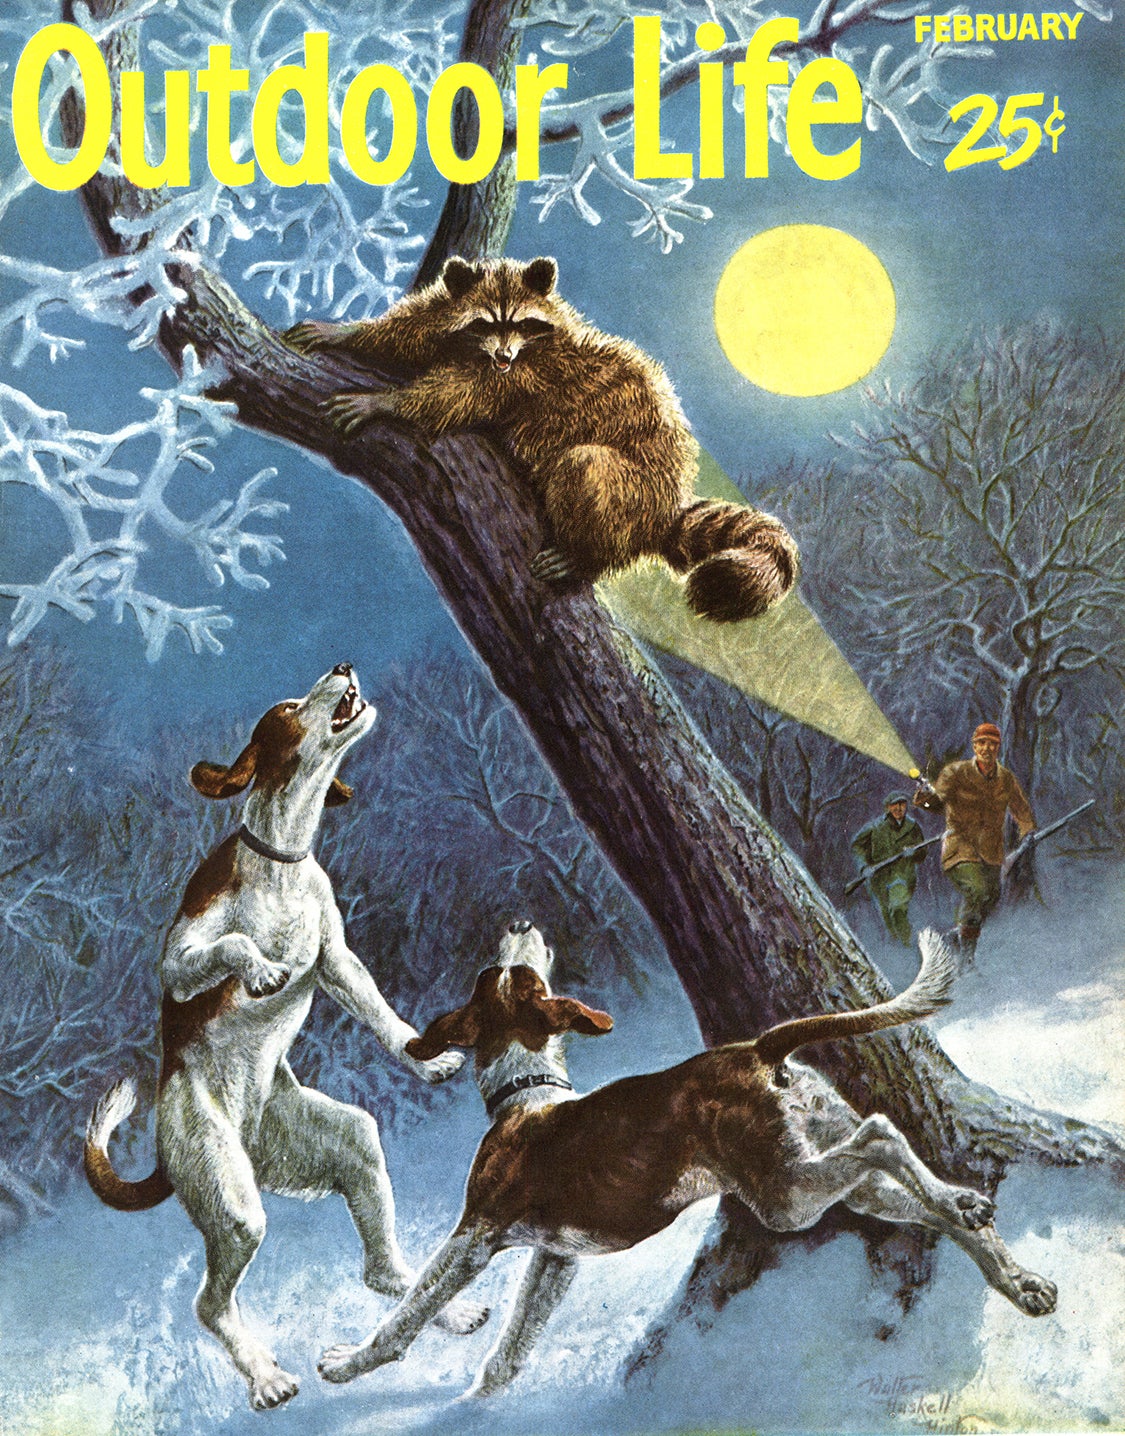 february 1955 Outdoor Life cover depicting a treed racoon, coondogs, and two hunters